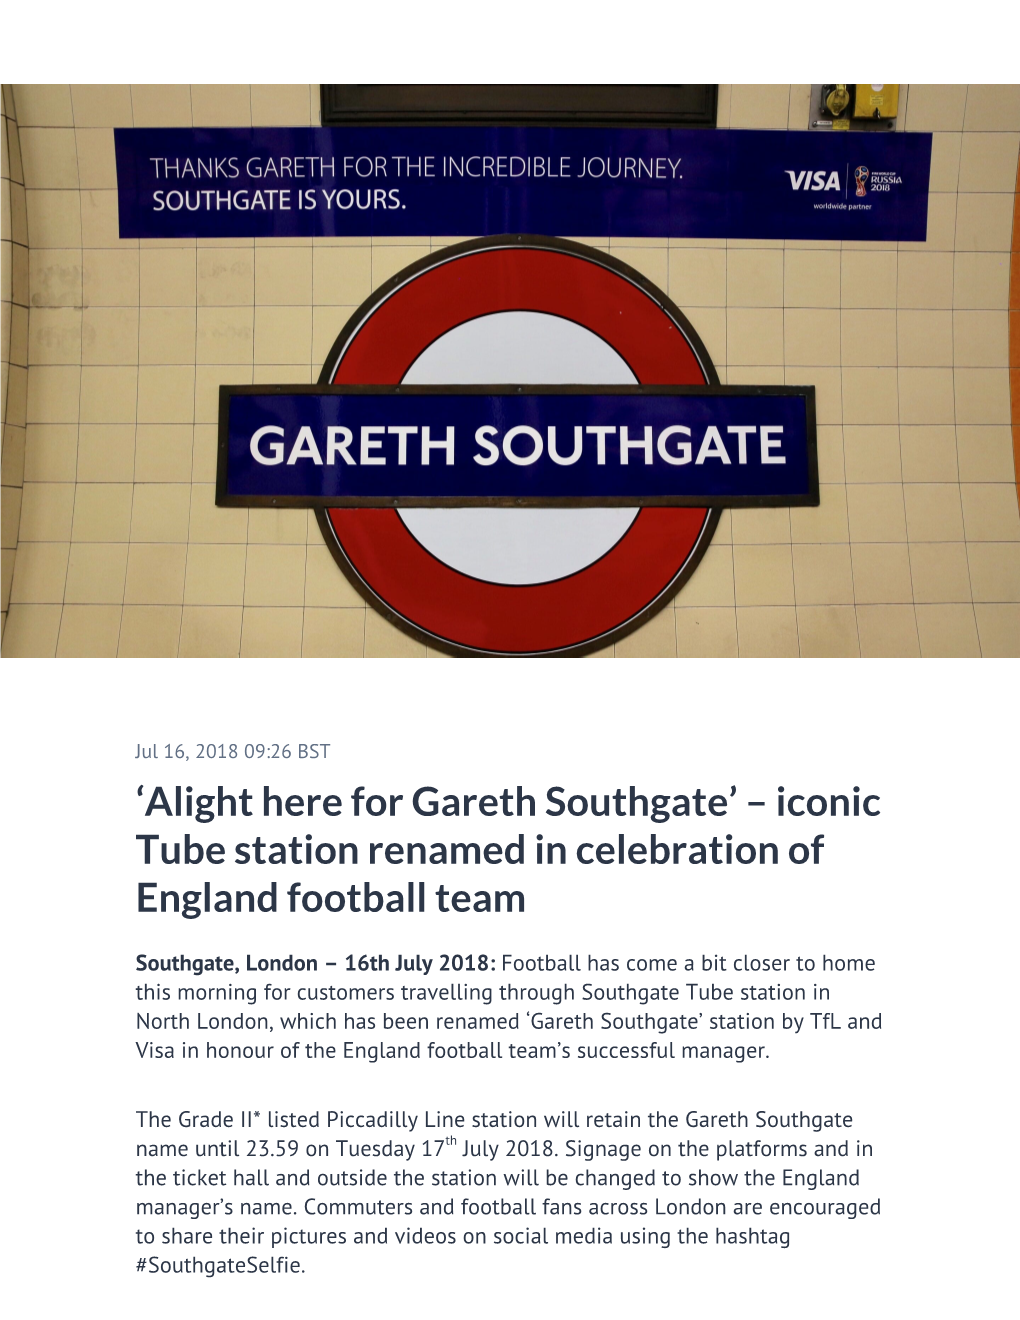 'Alight Here for Gareth Southgate' – Iconic Tube Station Renamed In